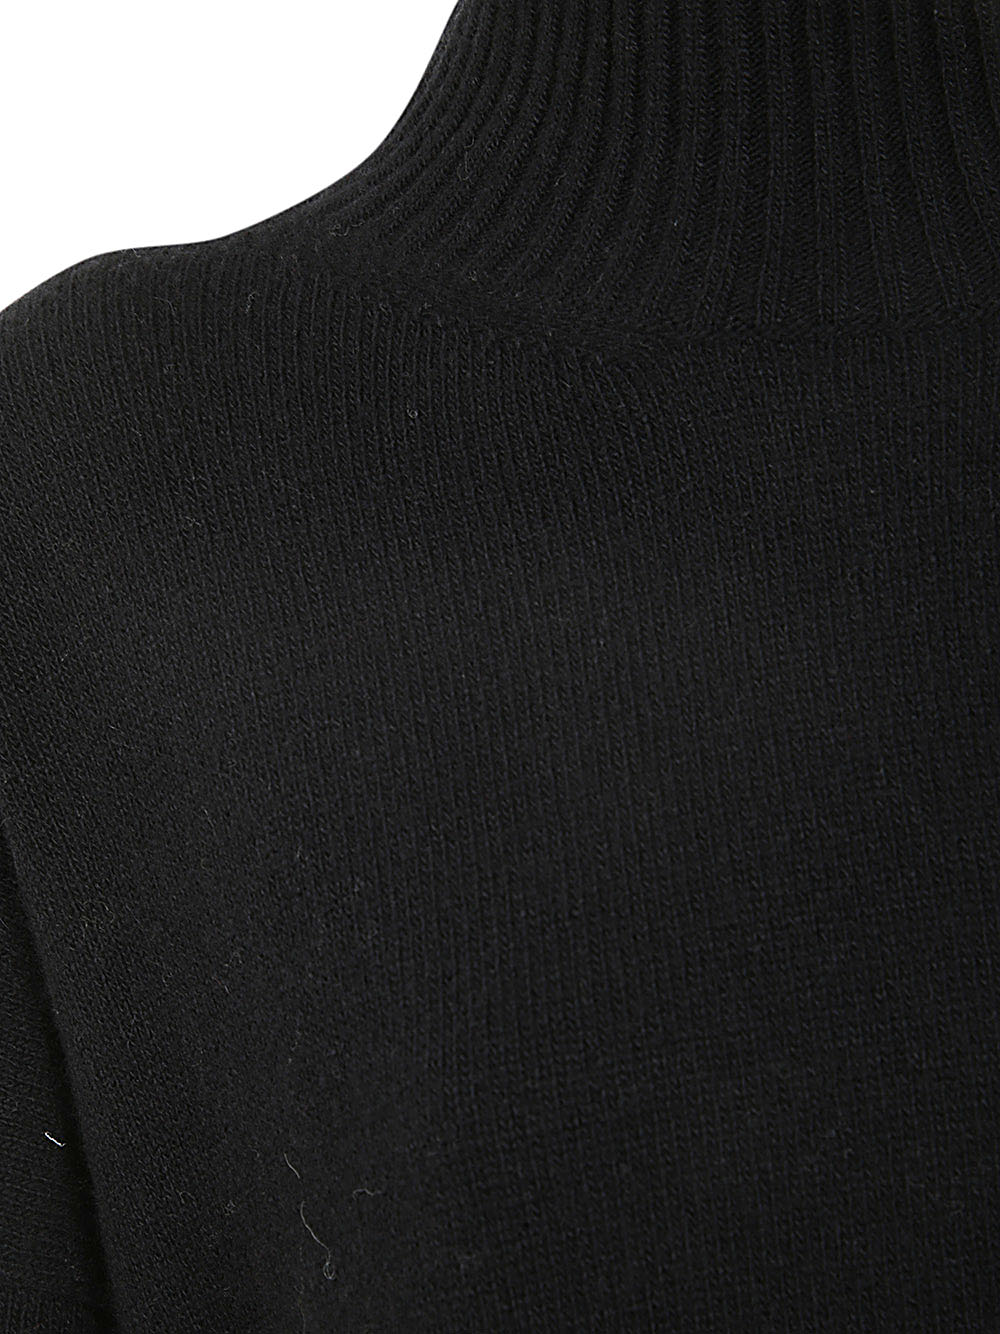 Long Sleeves Turtle Neck Sweater